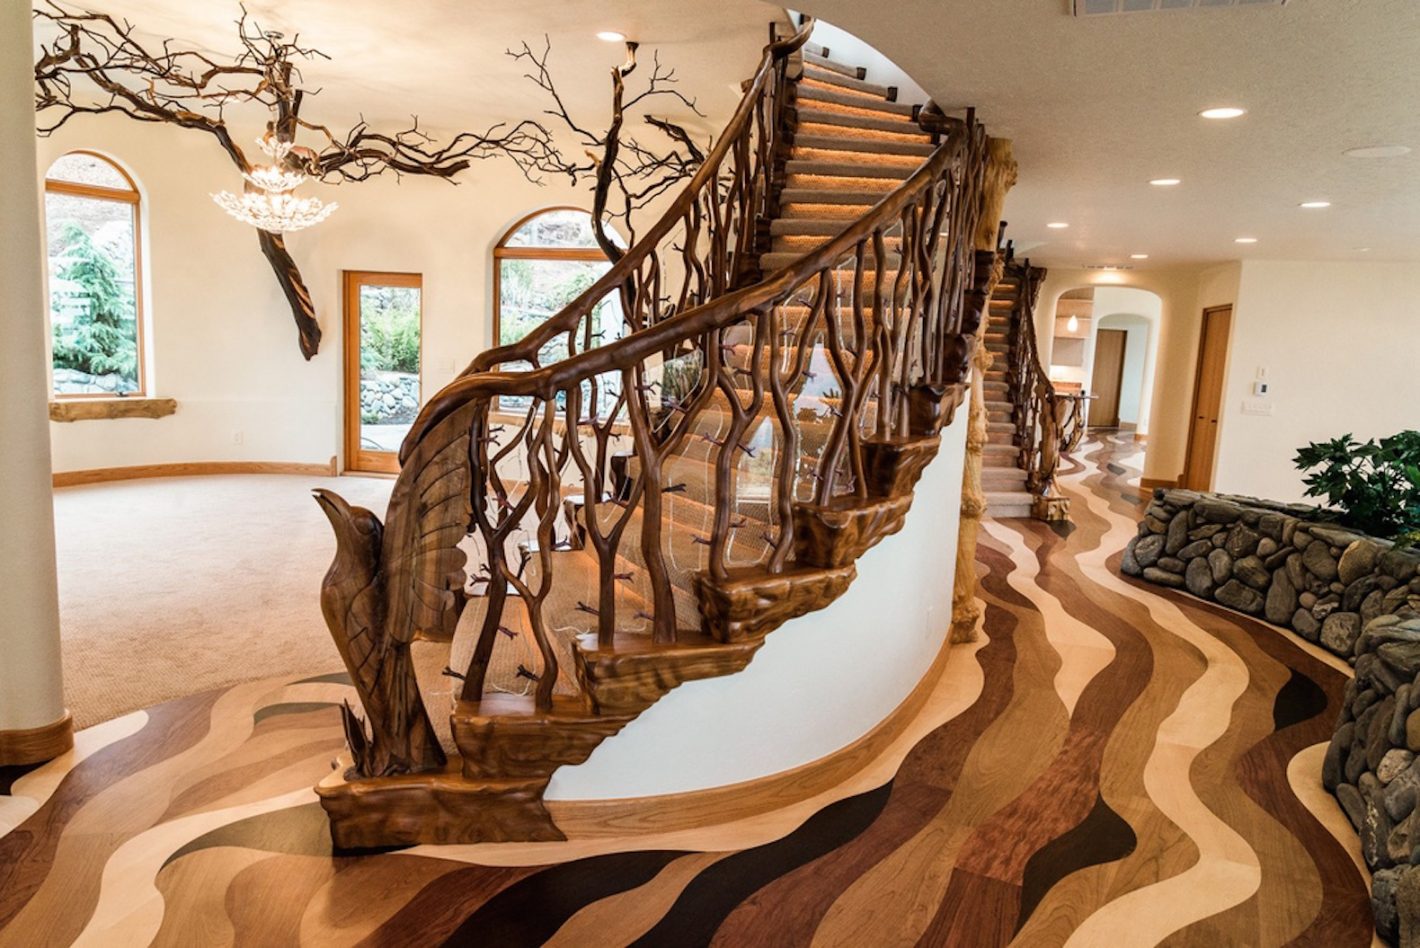 16 Unique Stair Railings That Will Amaze You - Page 3 of 3